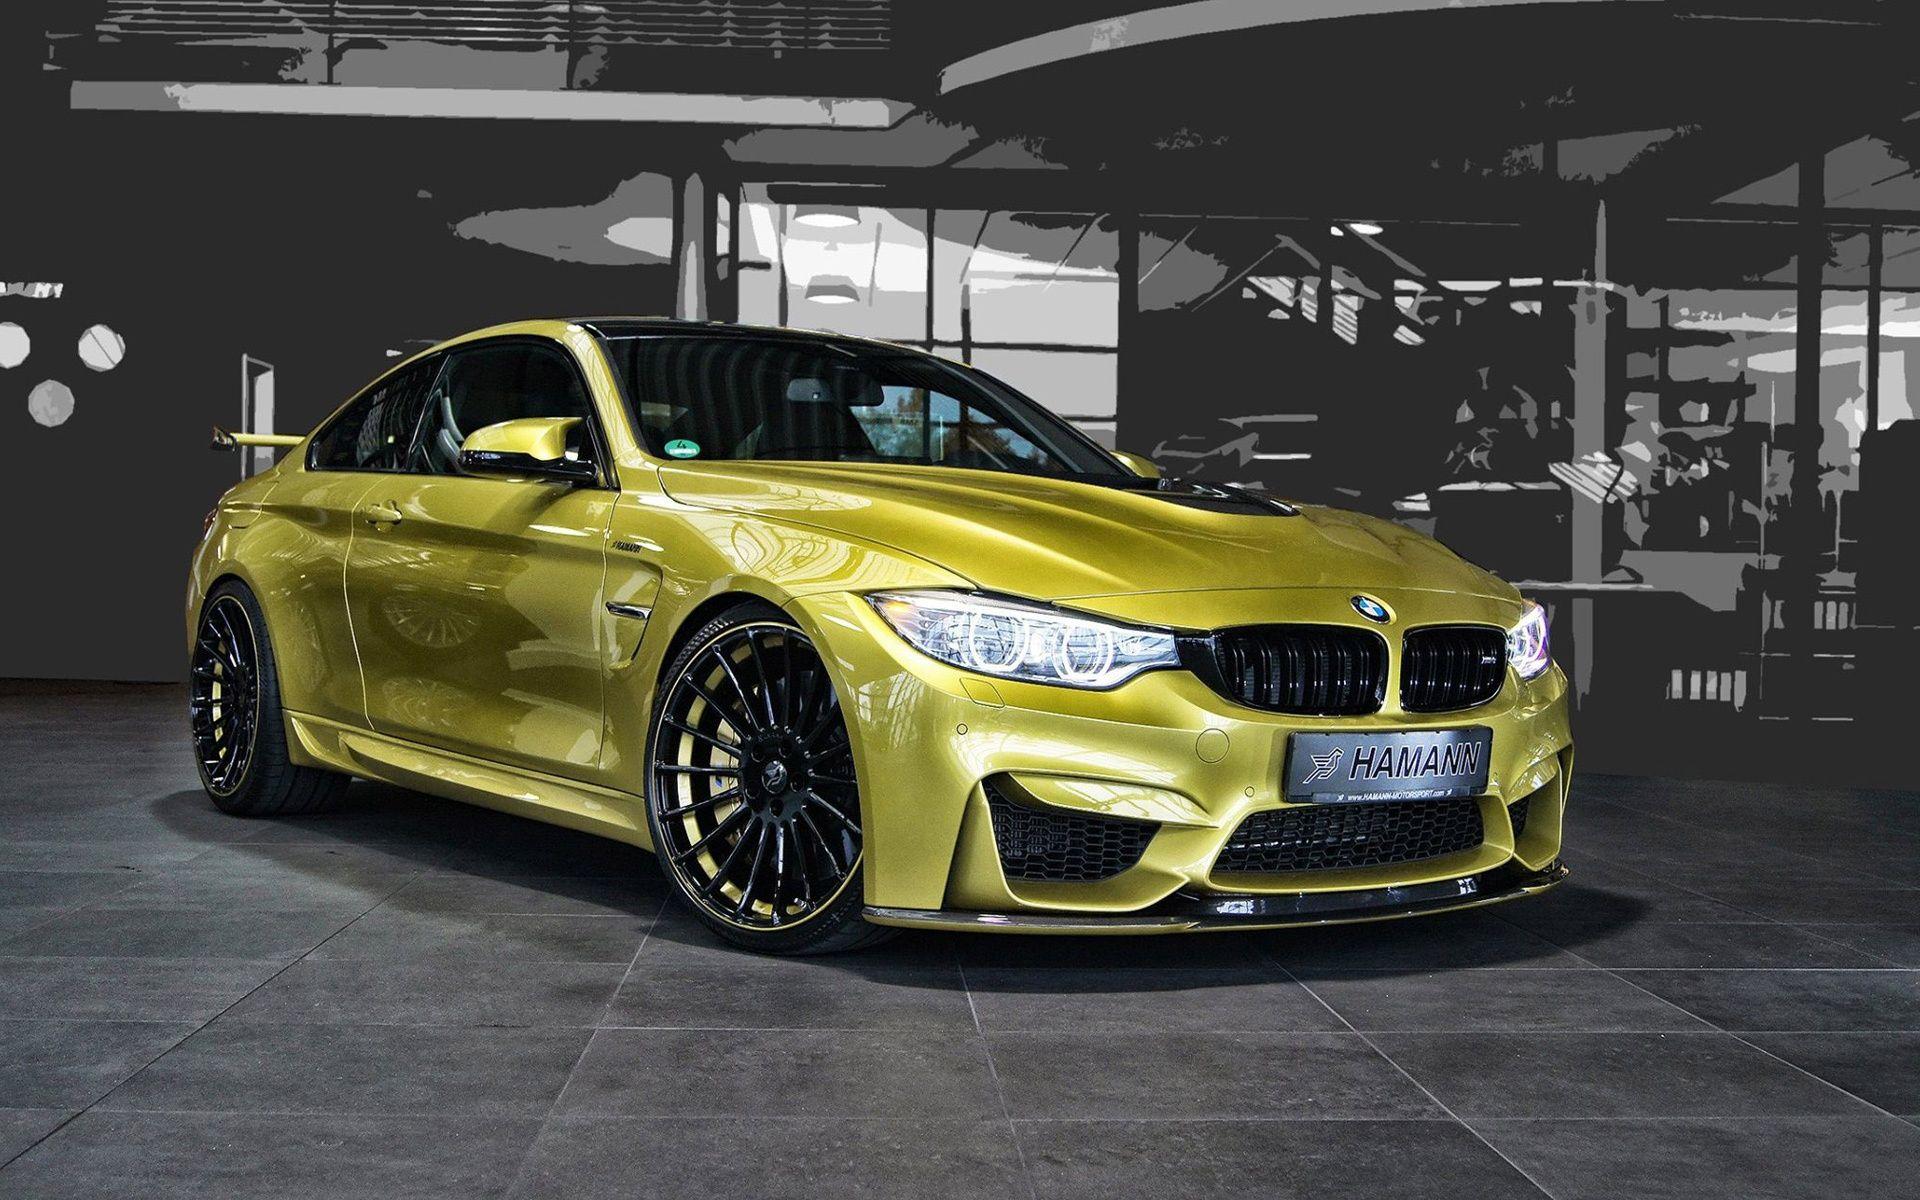 BMW ///M image BMW M4 (Golden) HD wallpaper and background photo